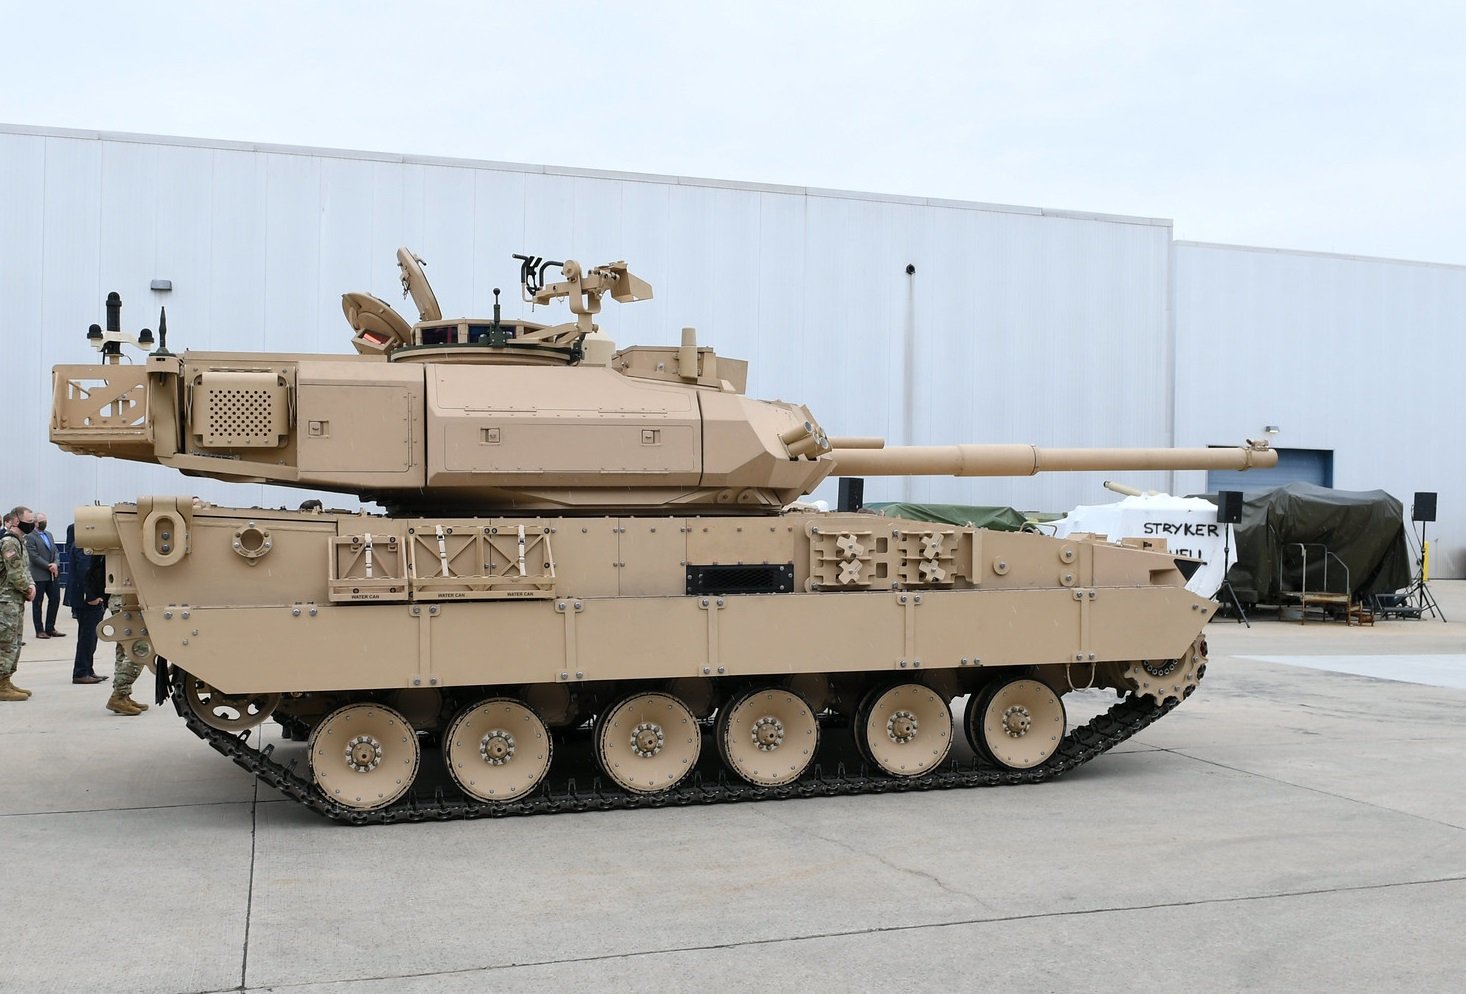 U.S. Army seeks a new light tank for quickly deployed force